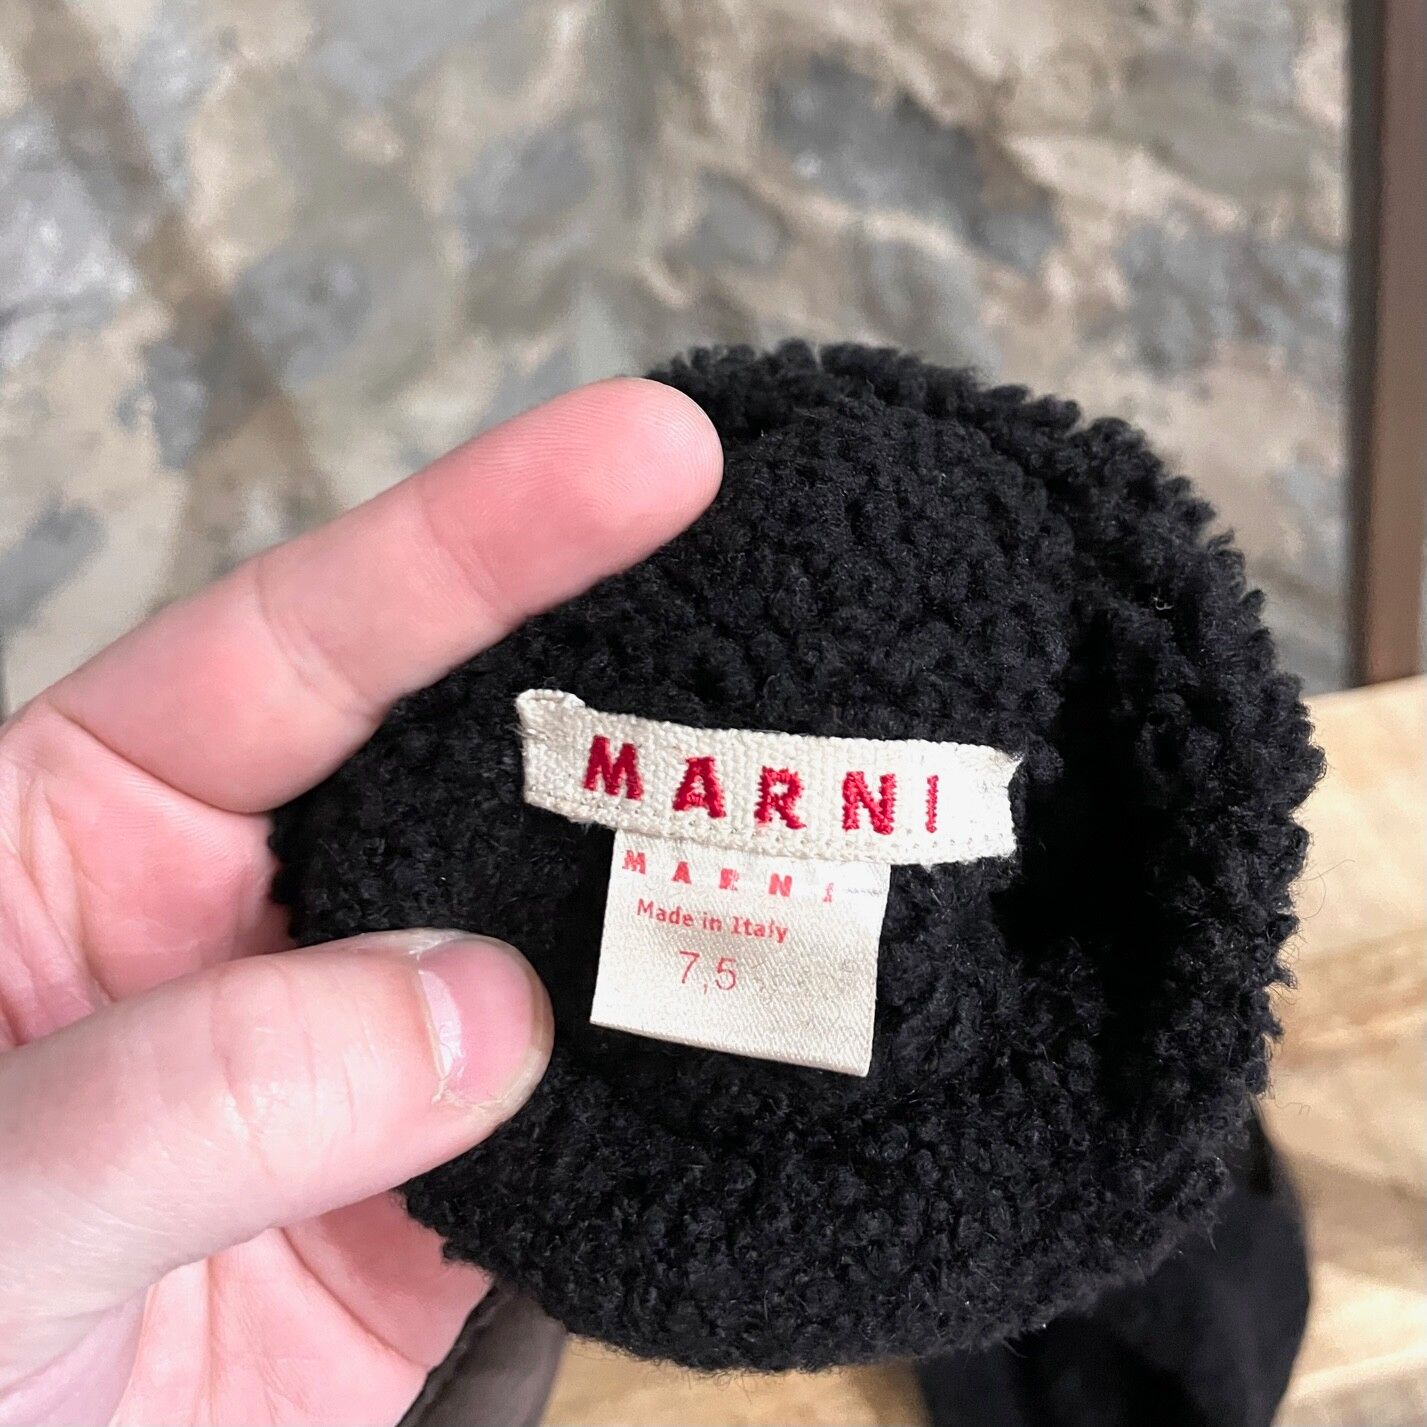 Marni Marni Chocolate Brown Suede Mittens Size ONE SIZE - 4 Thumbnail